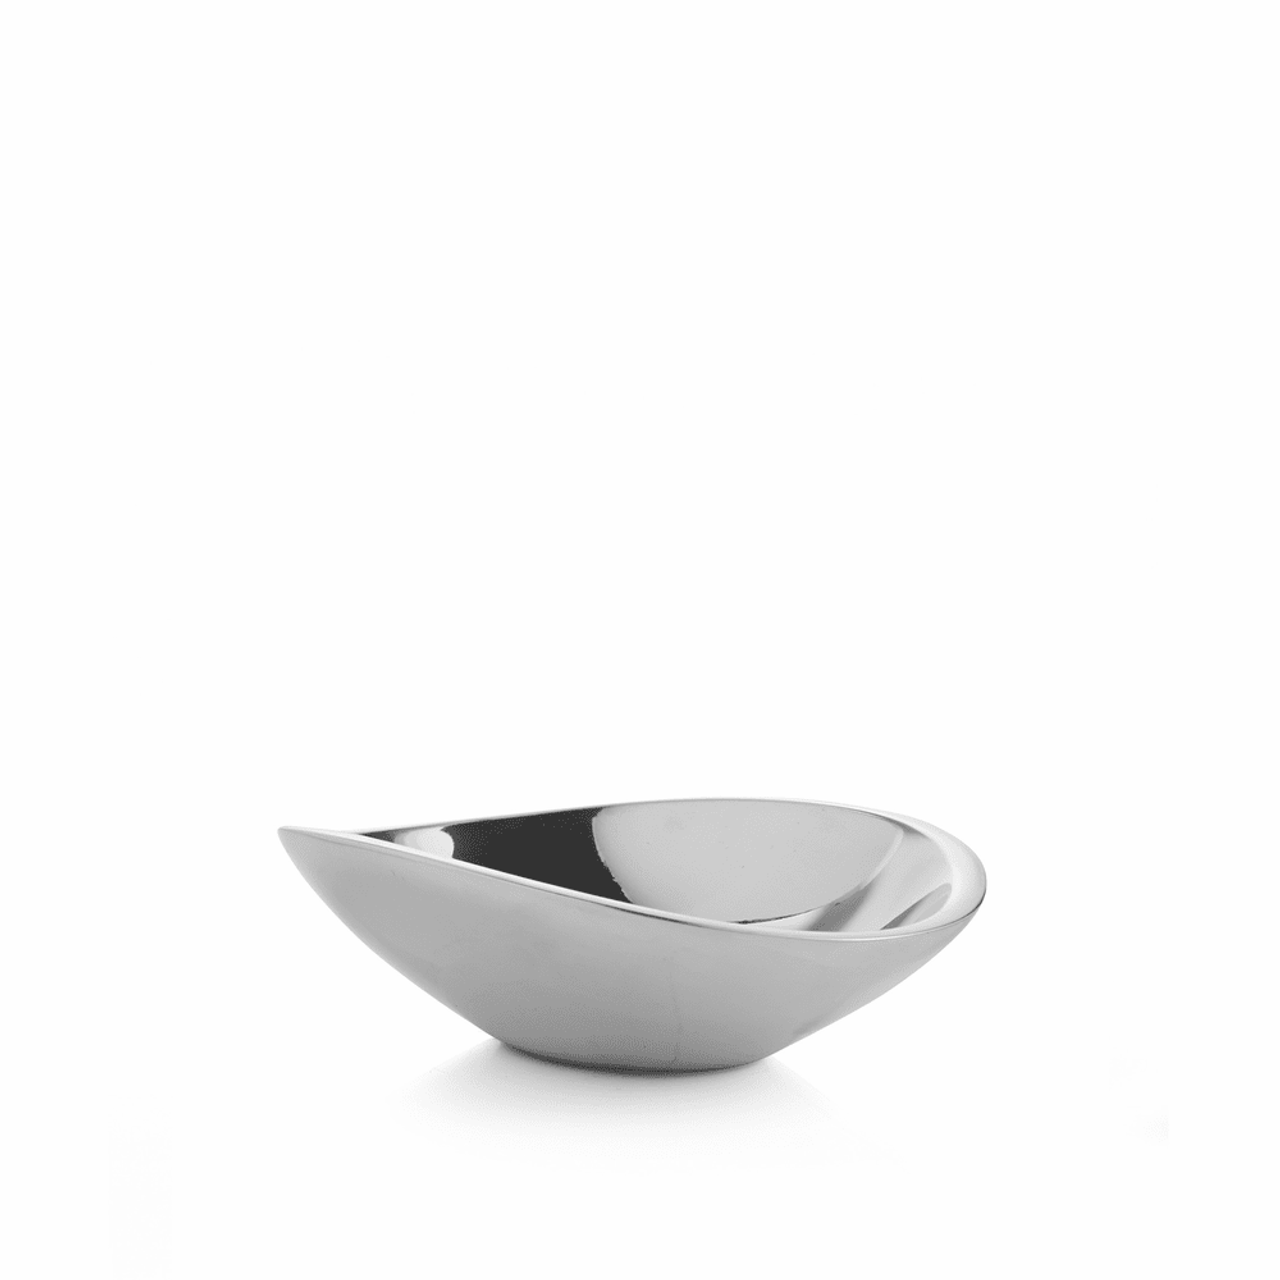 https://cdn11.bigcommerce.com/s-e0xlh4avpe/images/stencil/1280x1280/products/104748/138189/nambe-butterfly-small-bowl-9__83868.1650937870.png?c=1